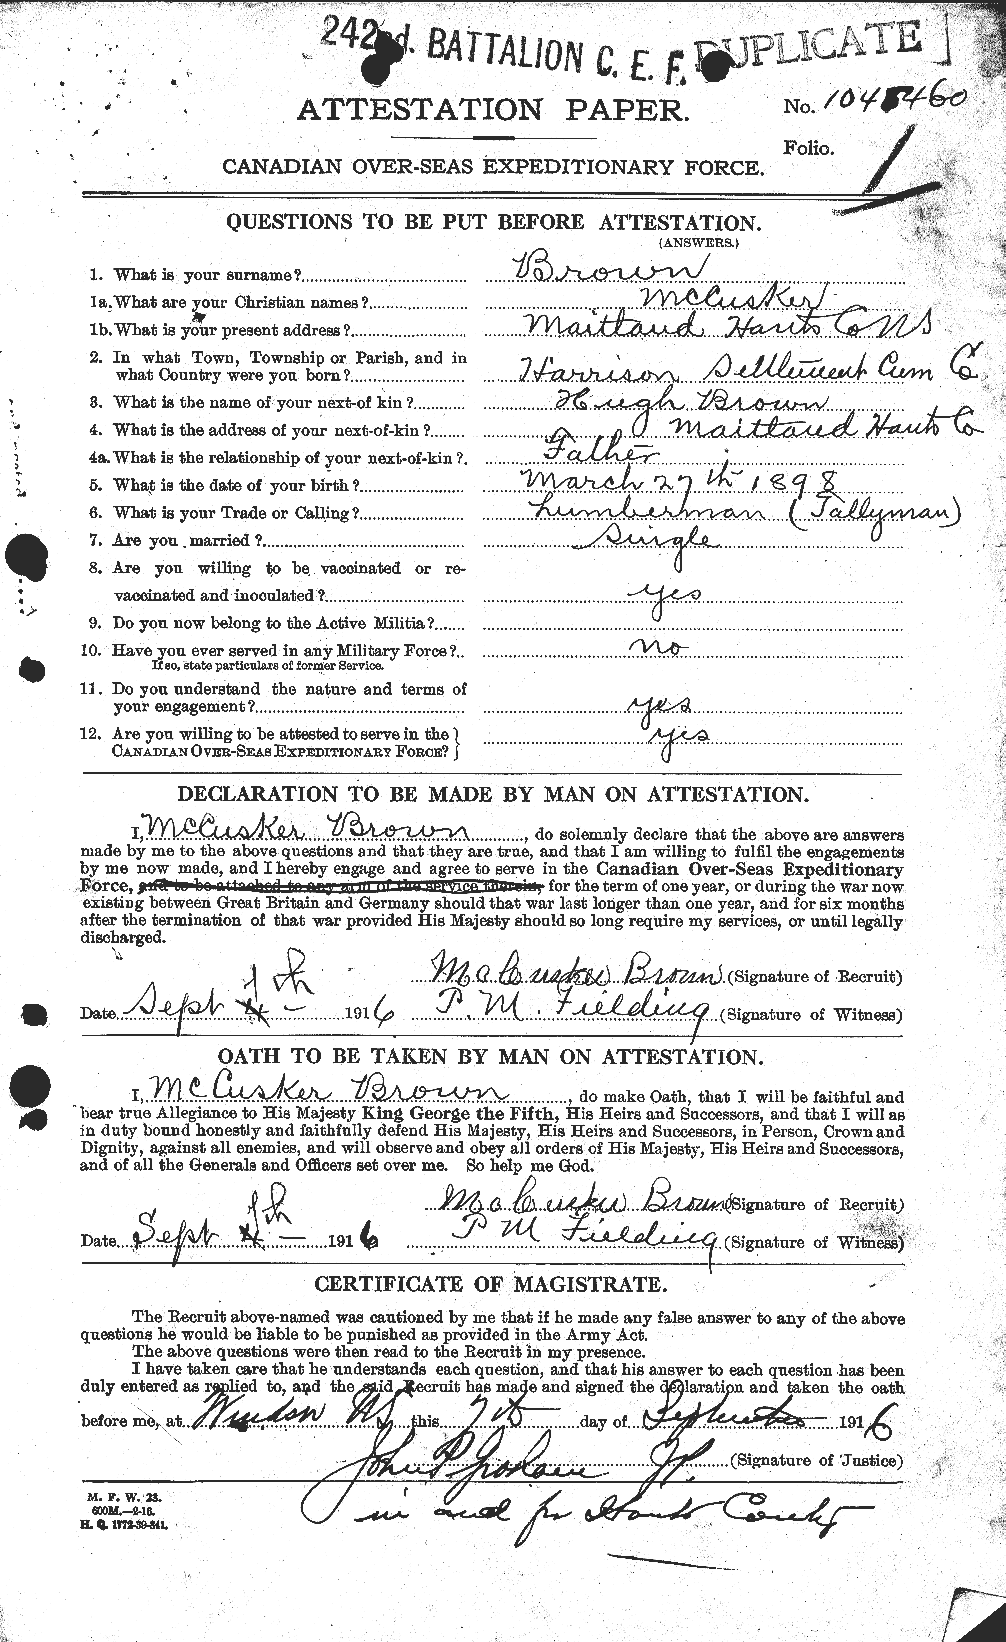 Personnel Records of the First World War - CEF 267050a